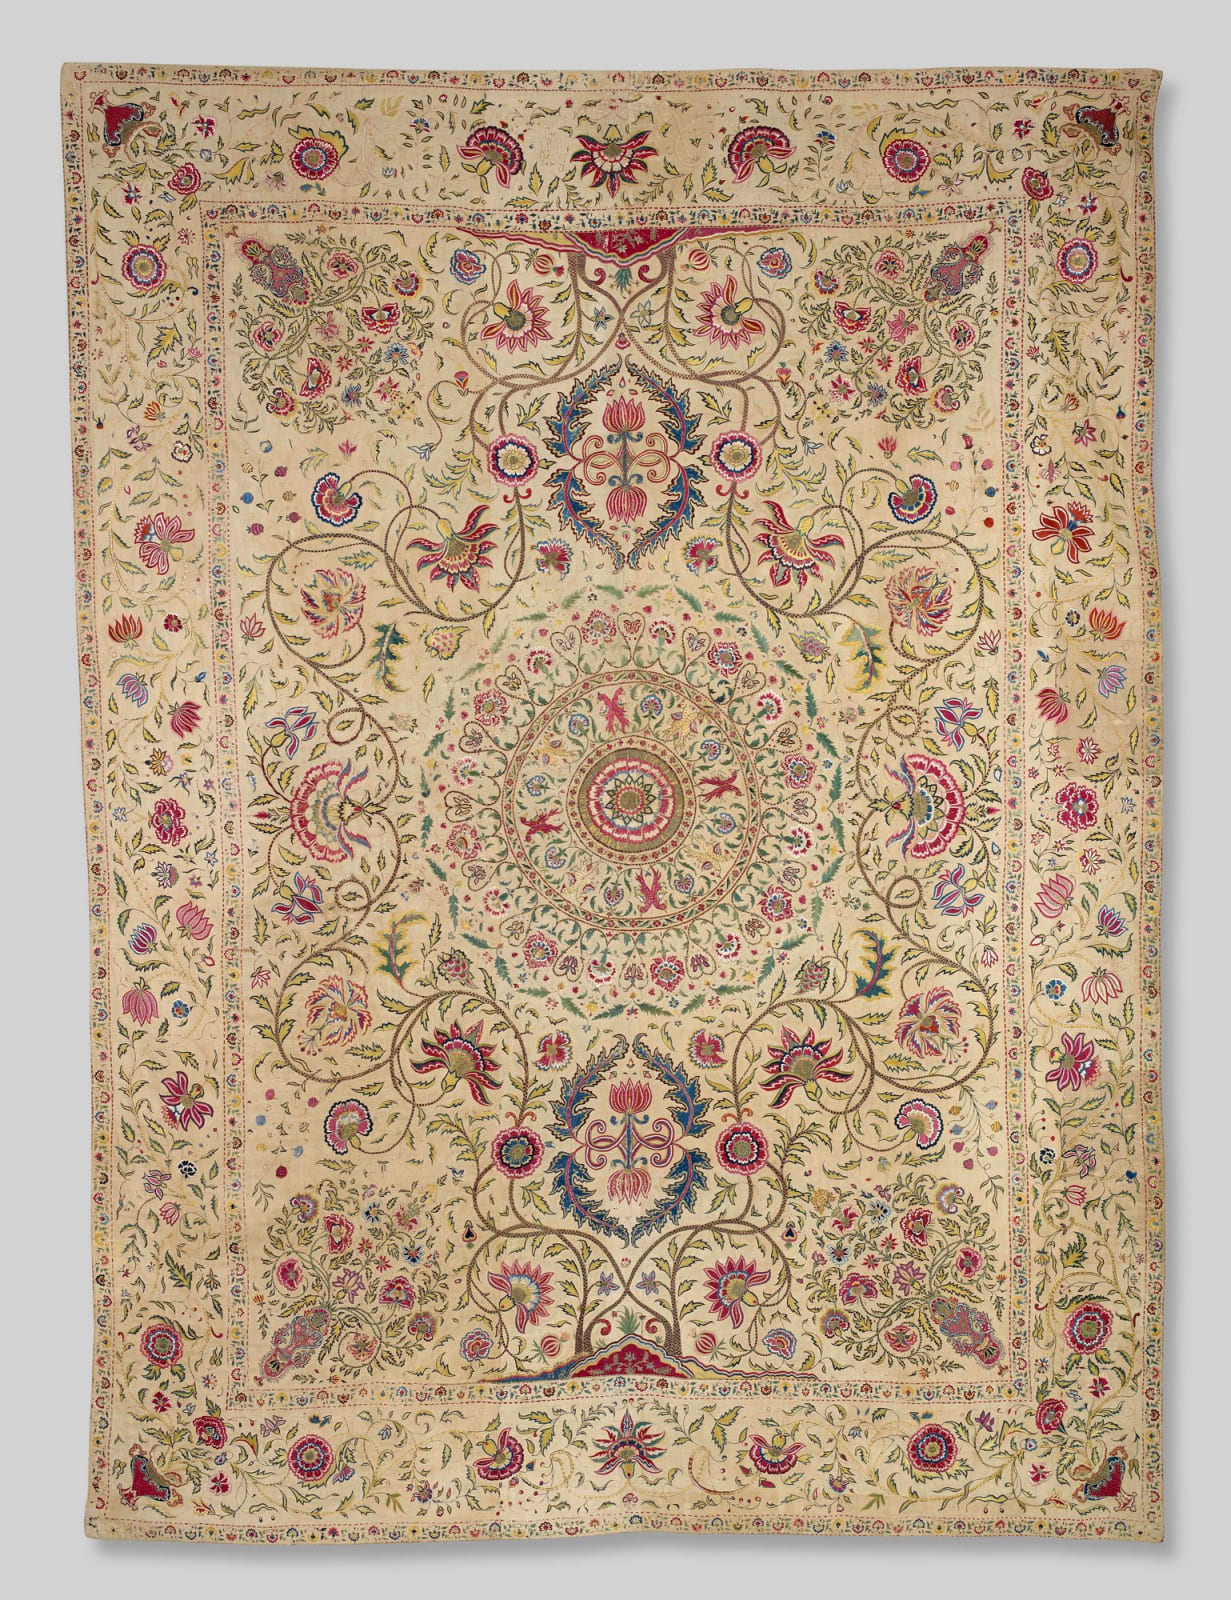 Embroidered Floorspread, Deccan, for courtly domestic or export market, 1750–1790